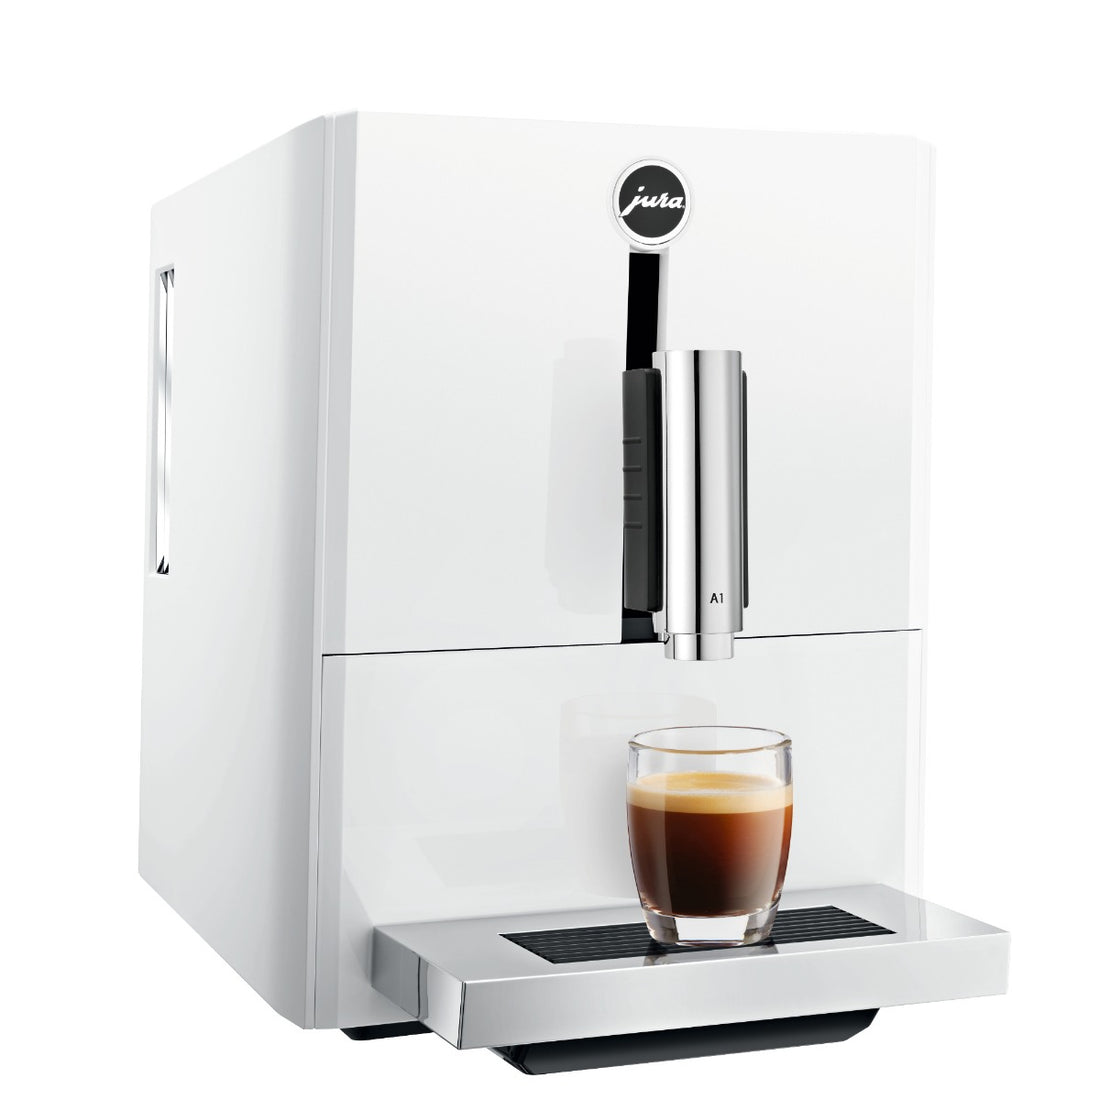 JURA A1 with a cup of espresso